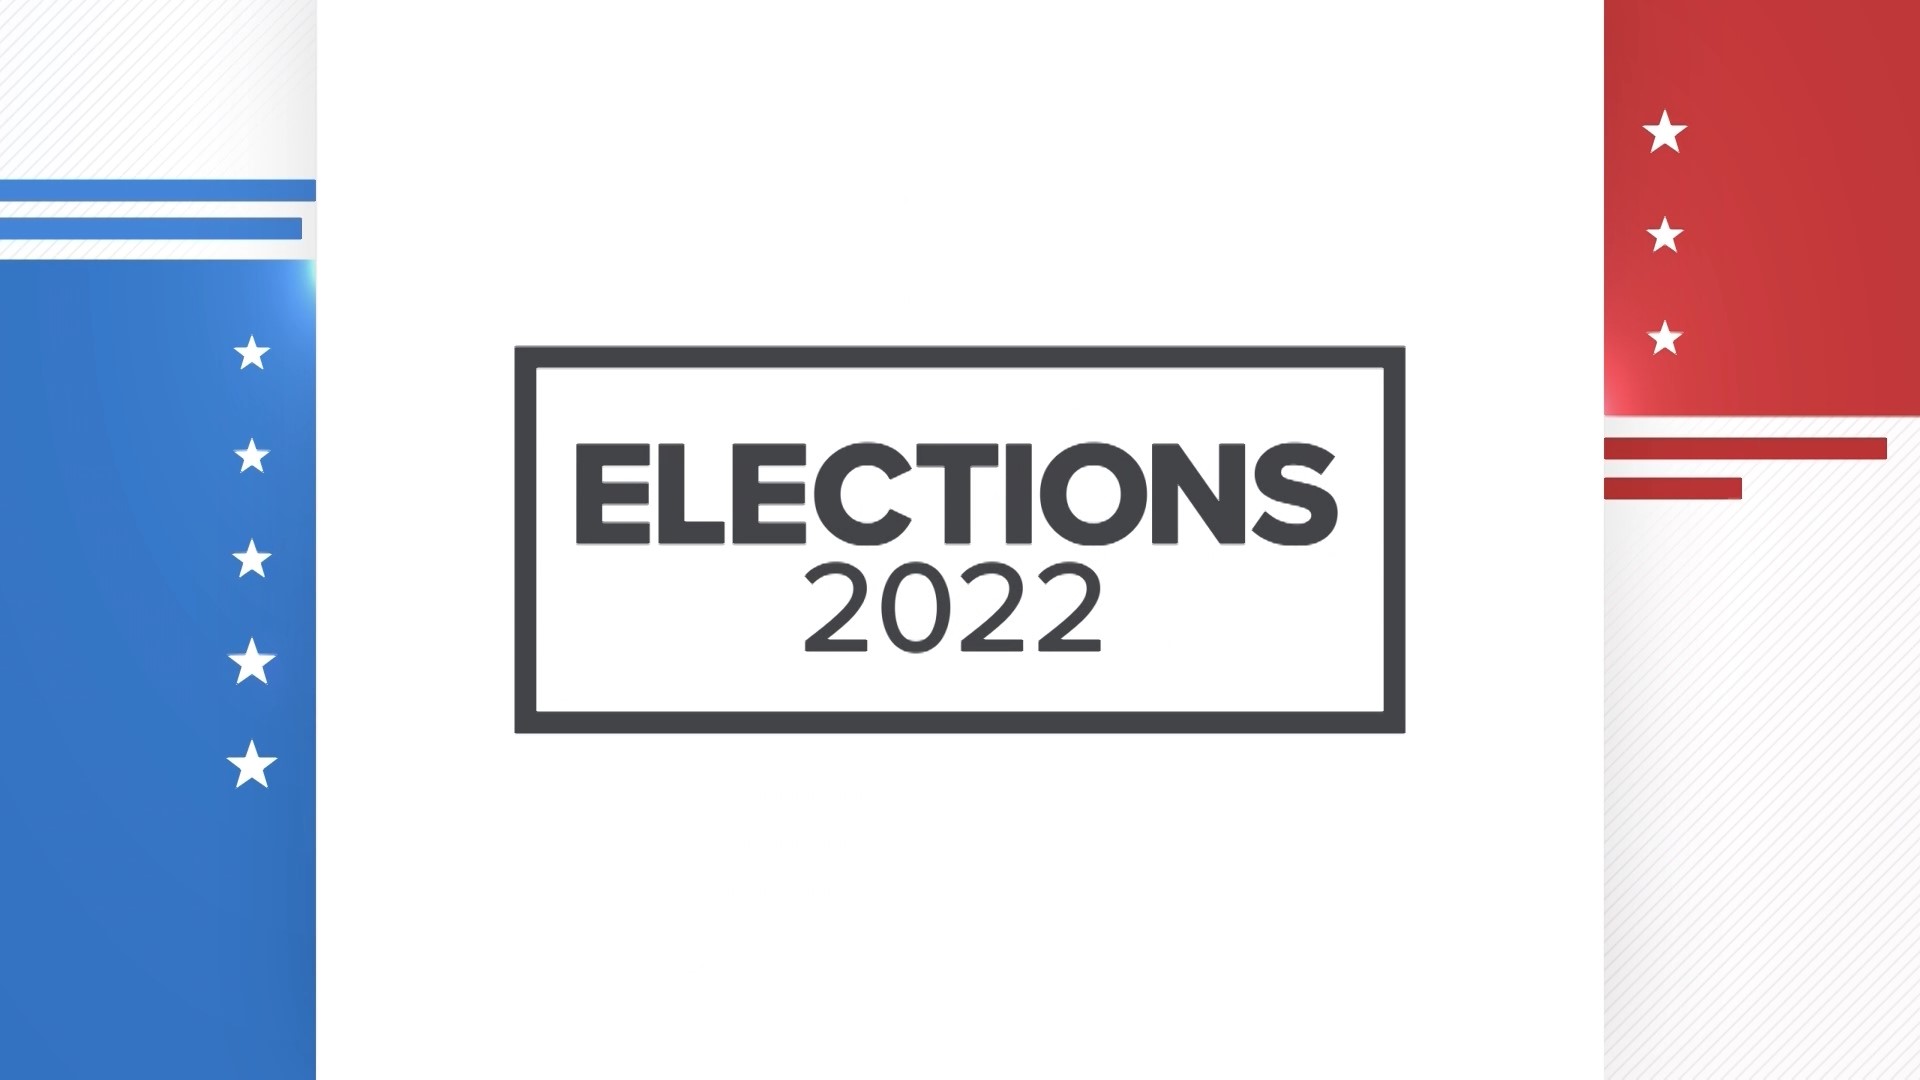 More election results, news and weather in less time on Nov. 8, 2022 at 10 p.m.